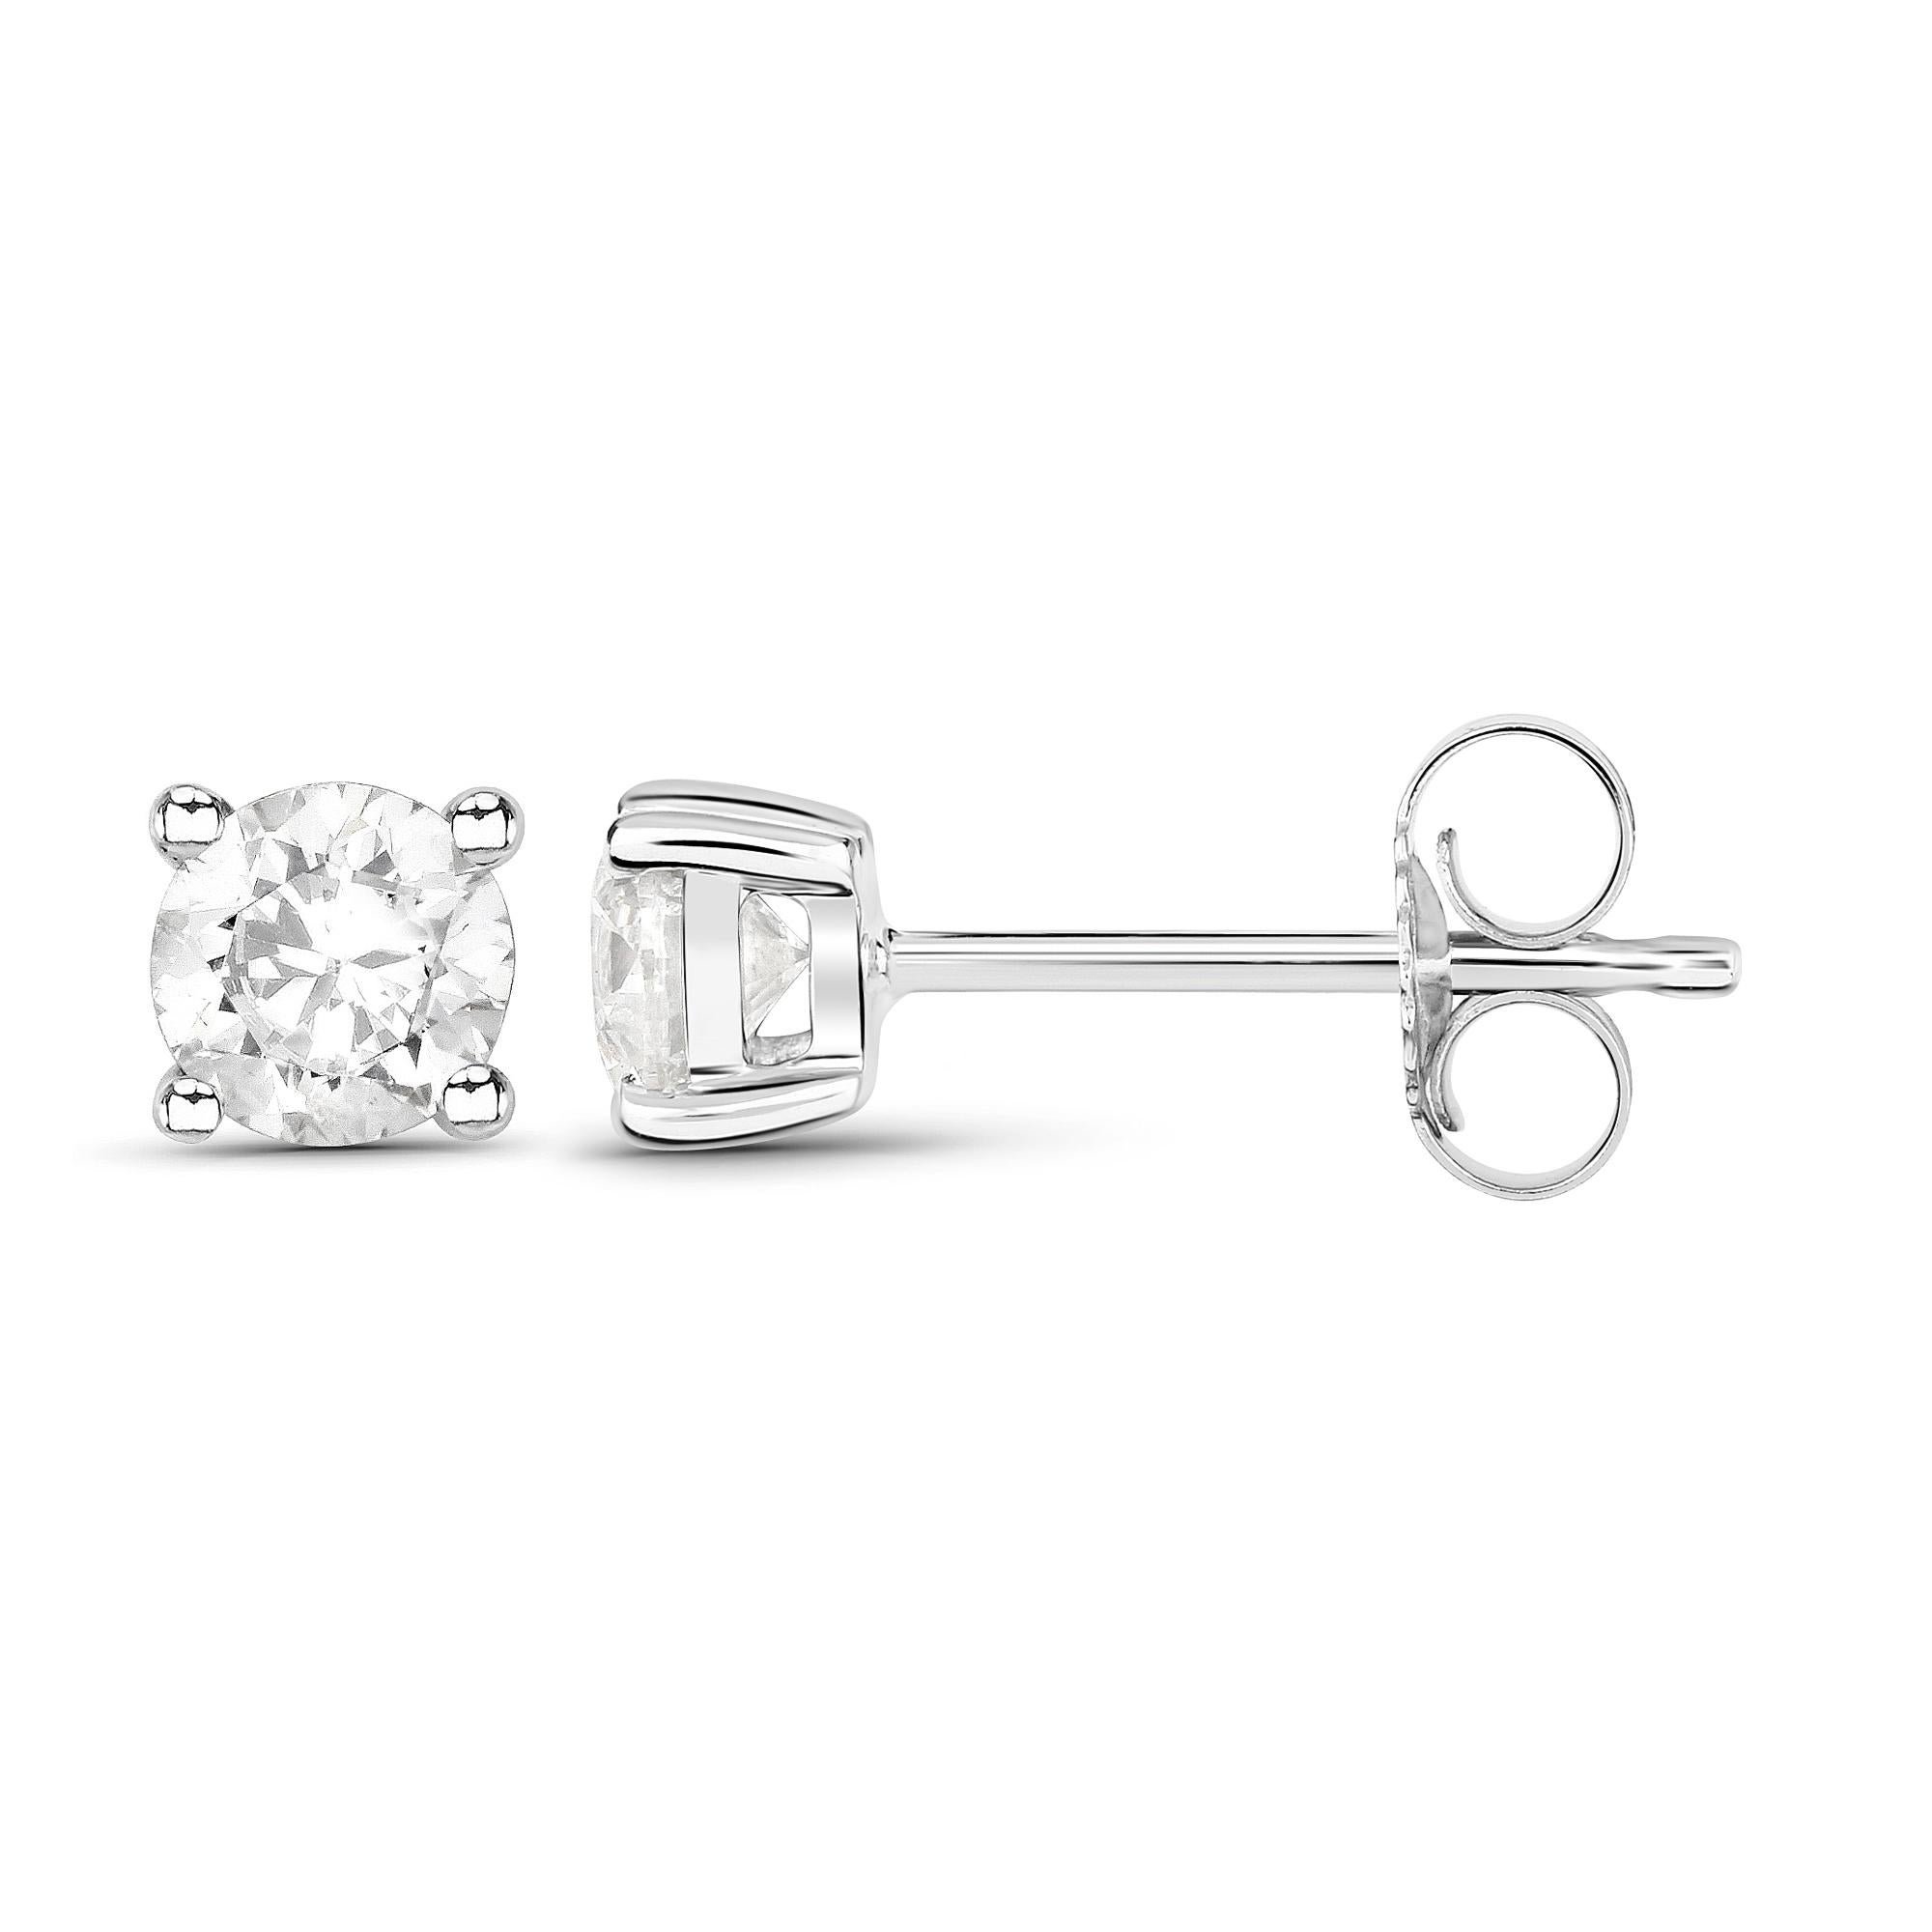 Flaunt yourself with these white diamond stud earrings. The natural gemstones have a combined weight of 0.58 carats and are set in 14K white gold. The white hue of these earrings adds a pop of color to any look! The understated design and vibrant